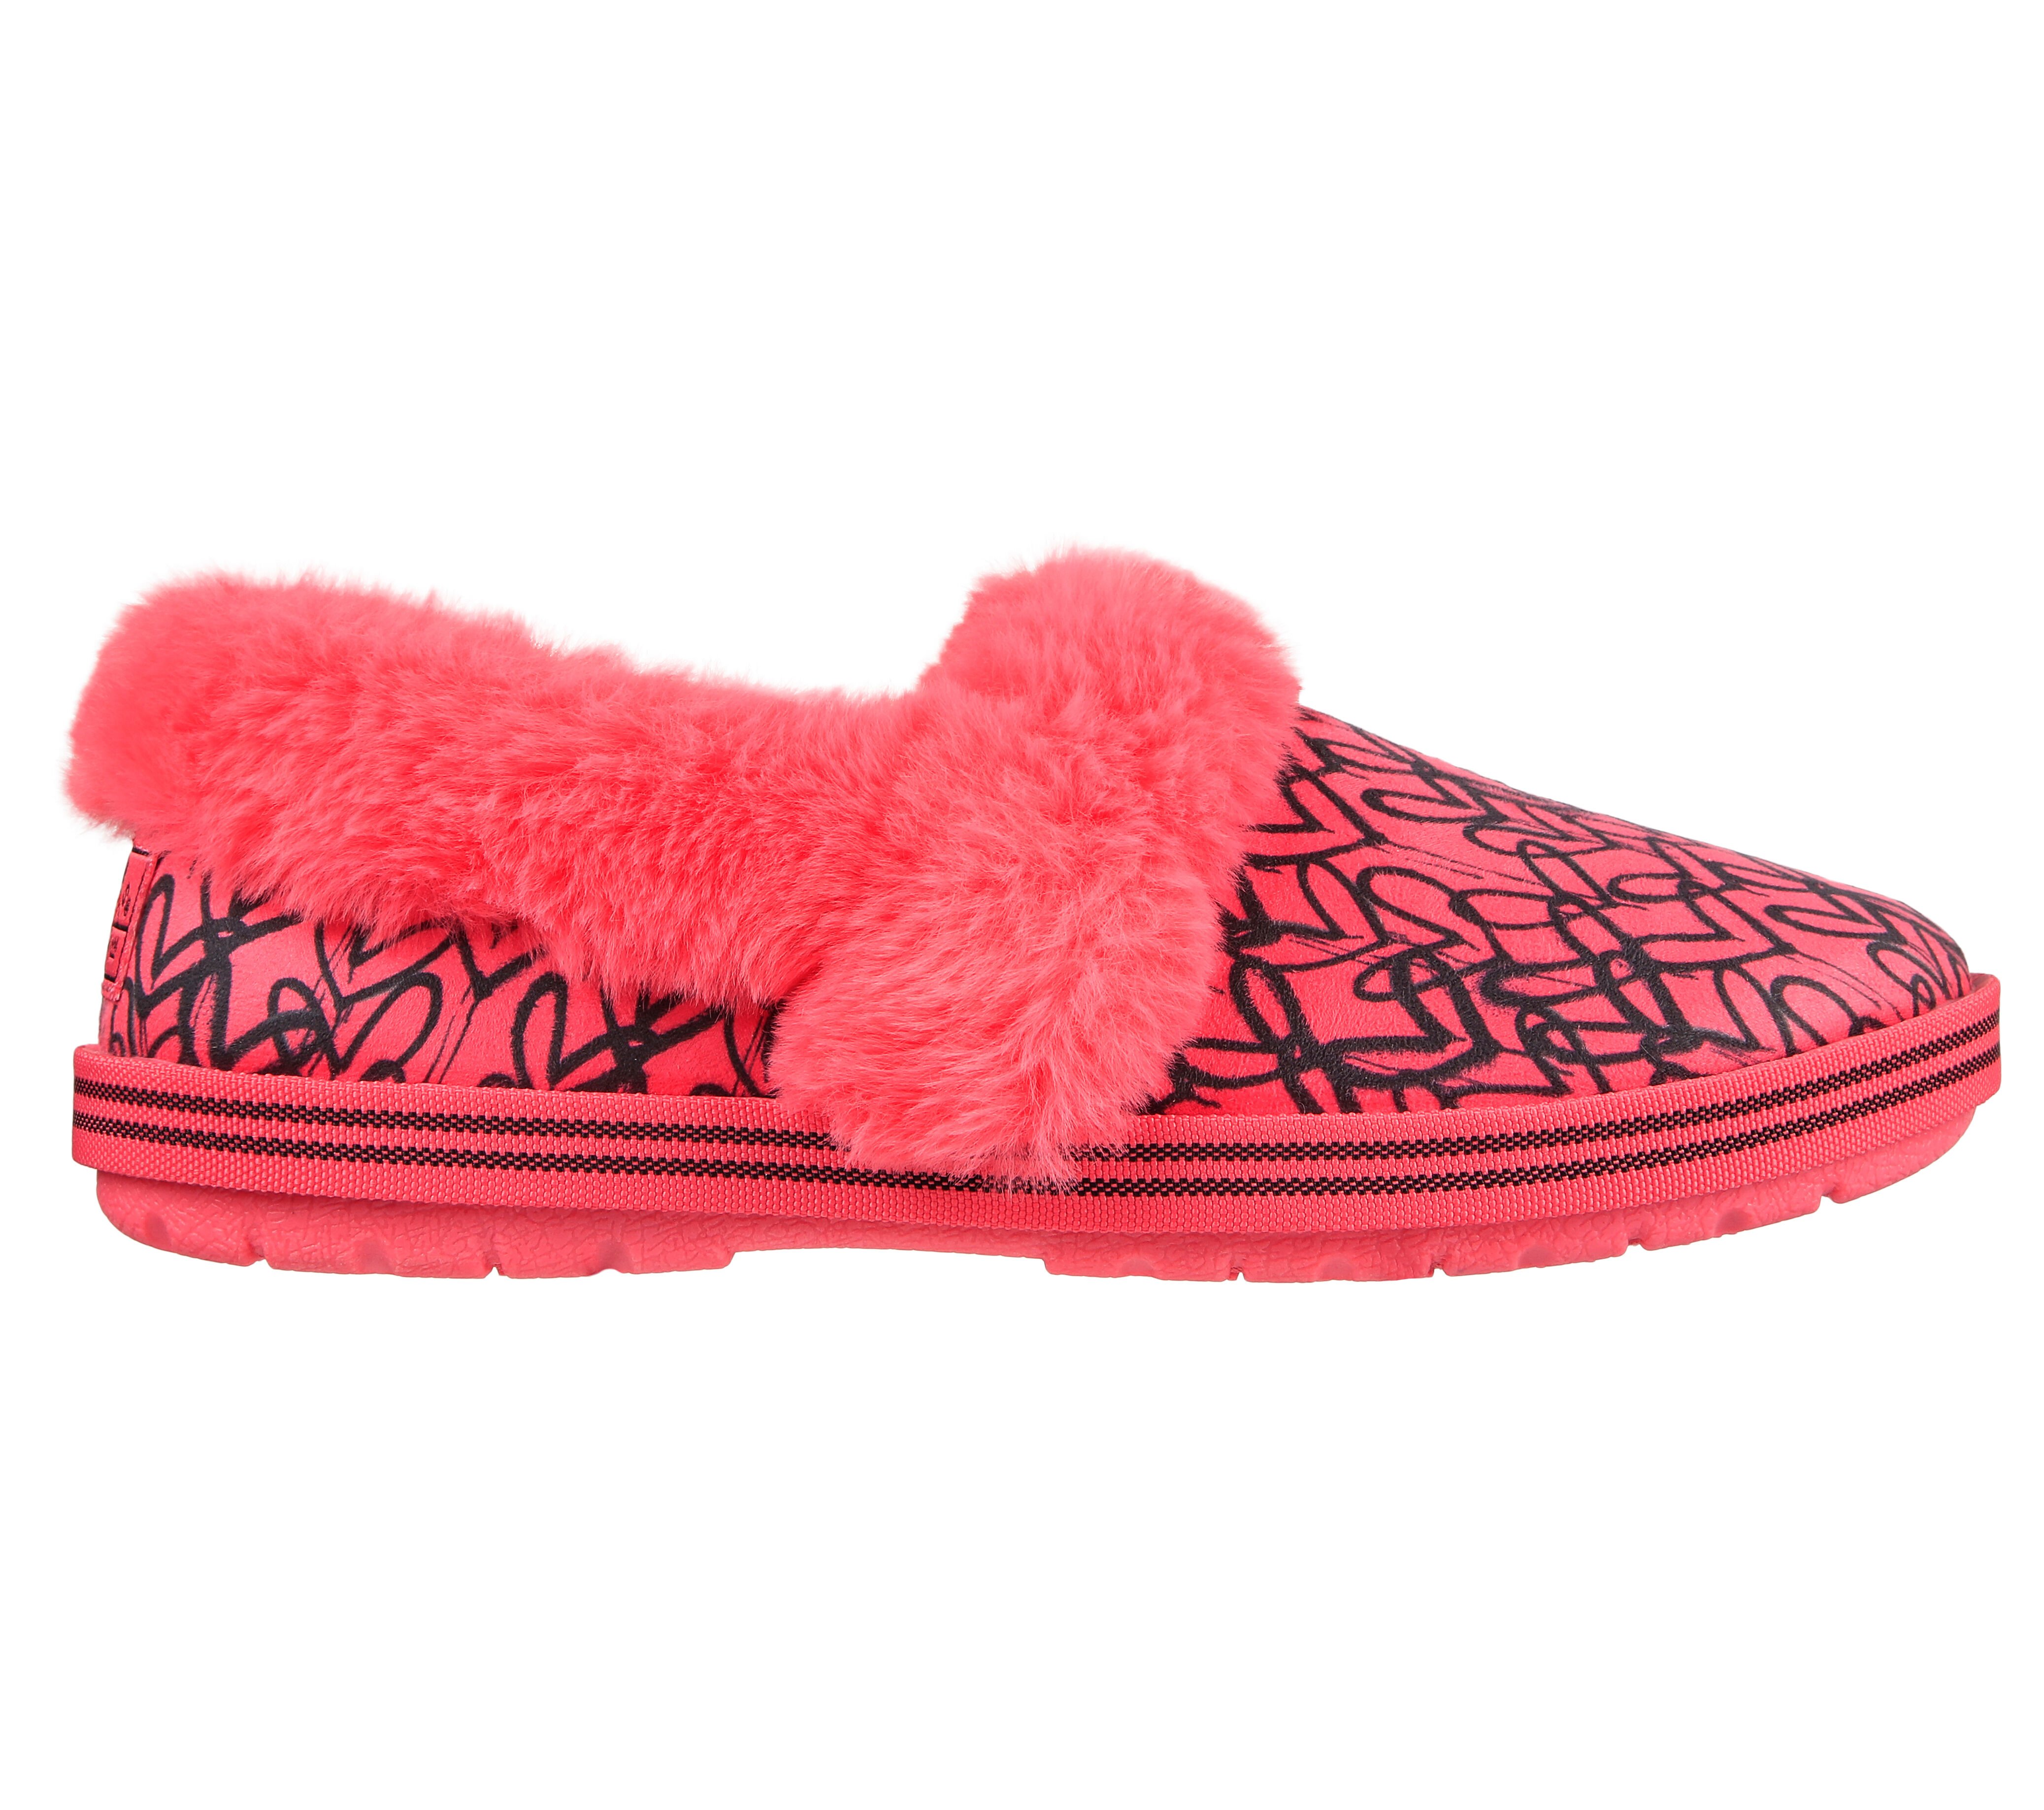 skechers slippers prices